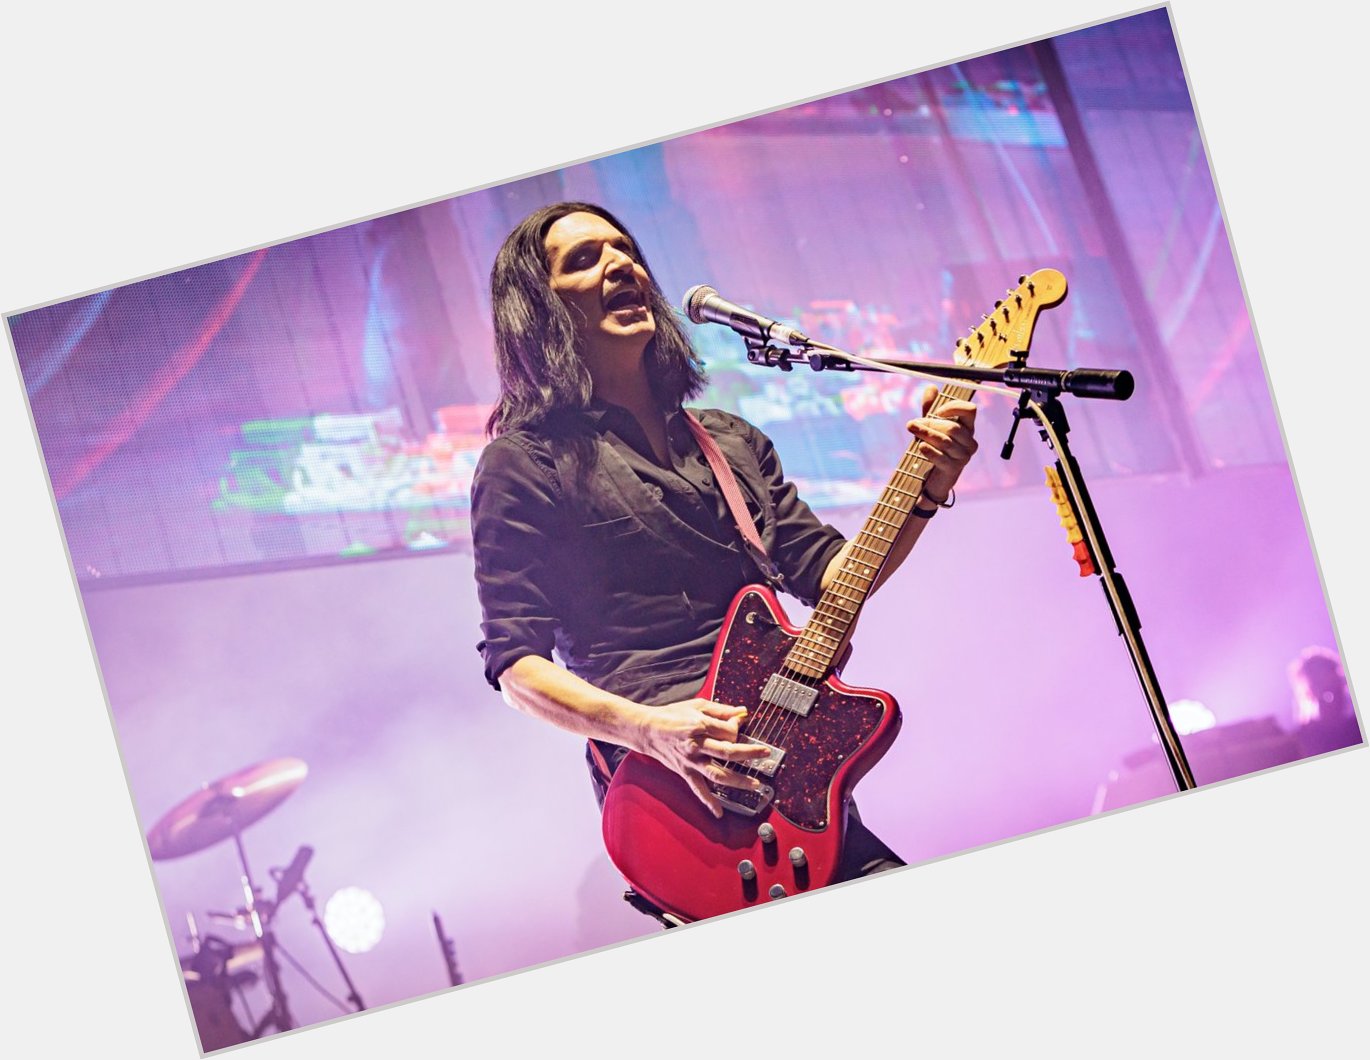 Big happy birthday (and get well soon!) wishes to Brian Molko of Placebo! 